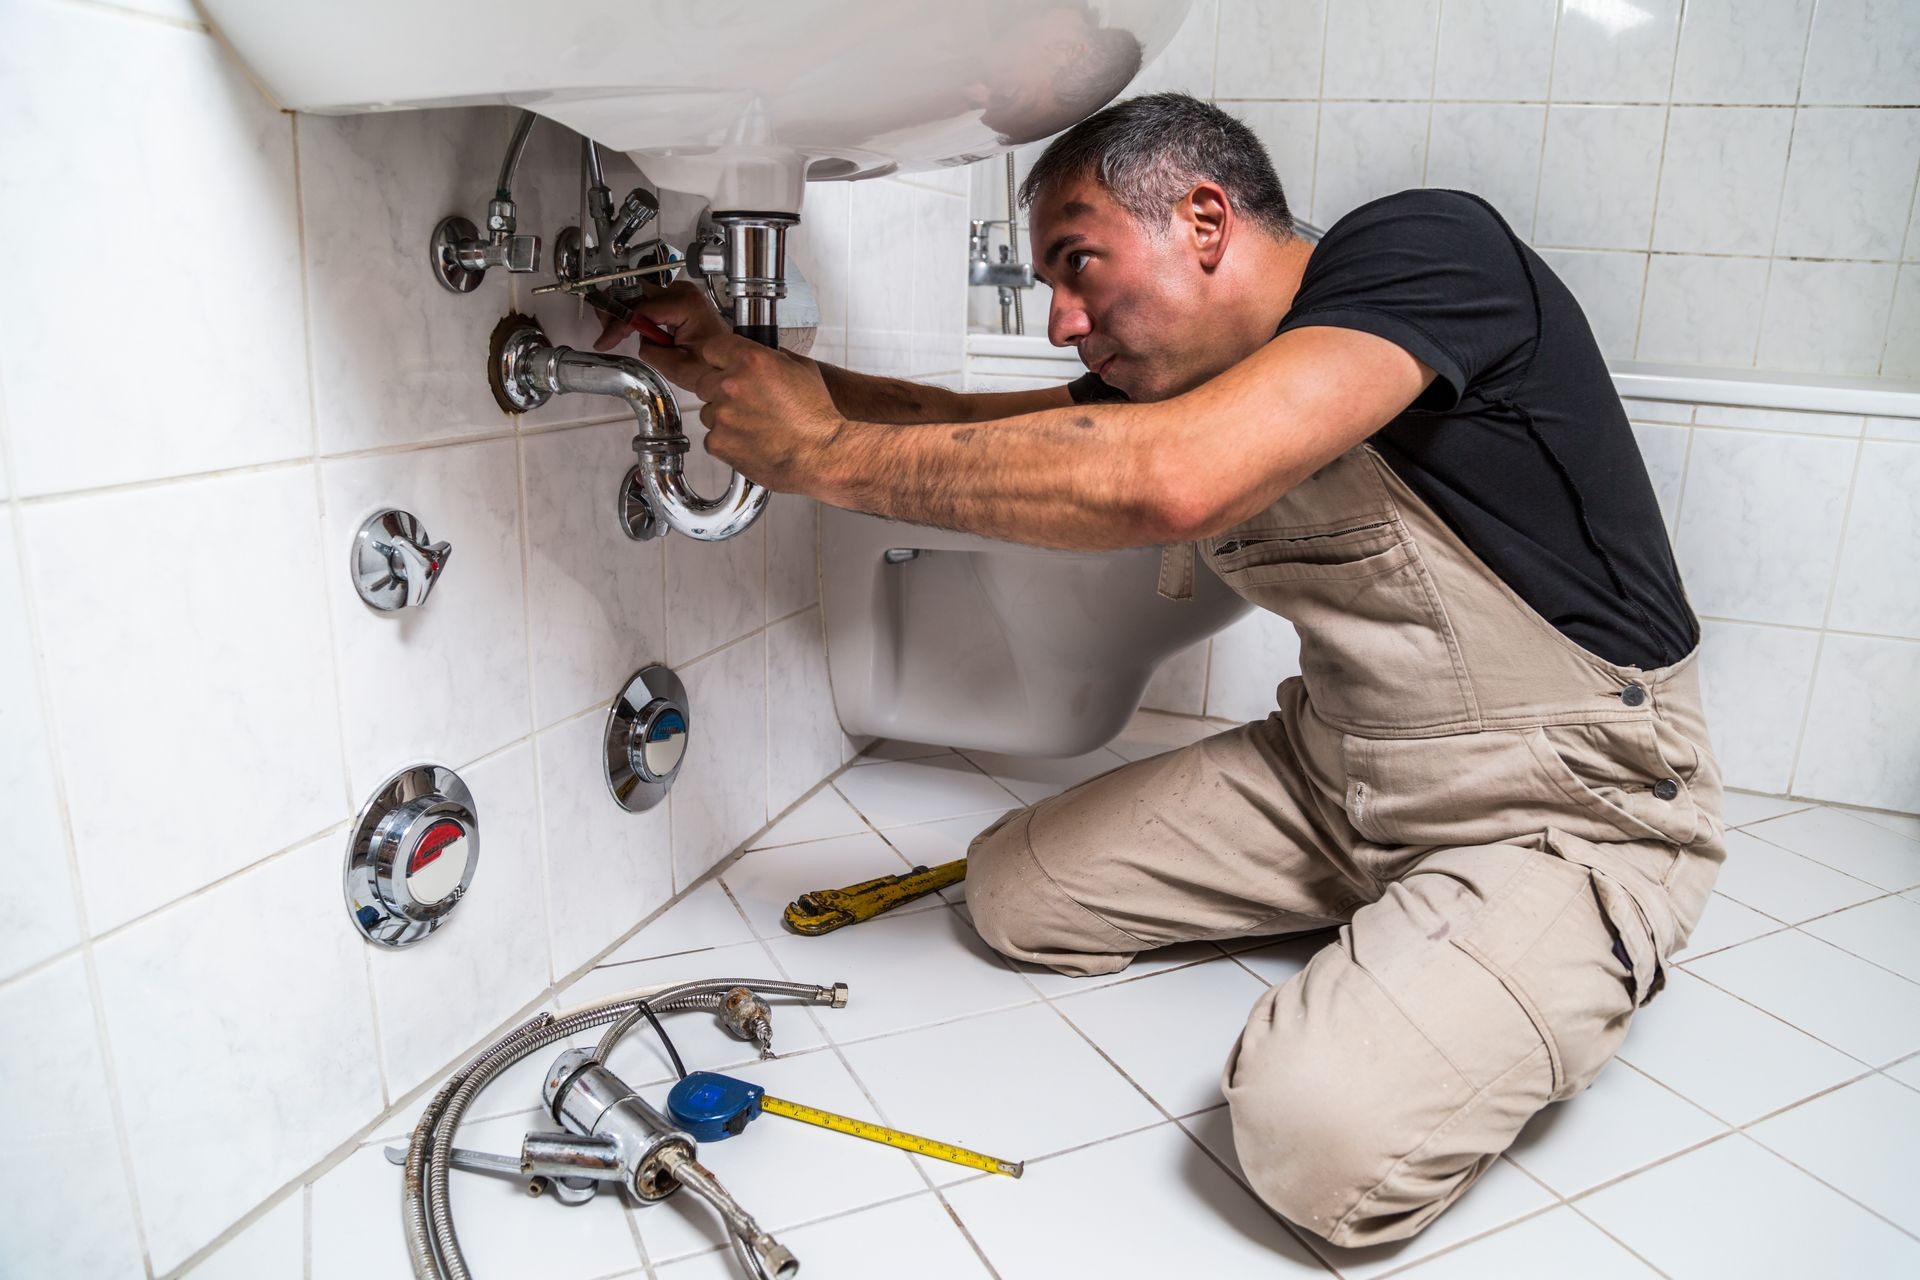 Specialist male plumber in overalls and black t-shirt repairs faucet with yellow old shabby screwdriver in bathroom on the floor near screwdriver, hammer, pliers